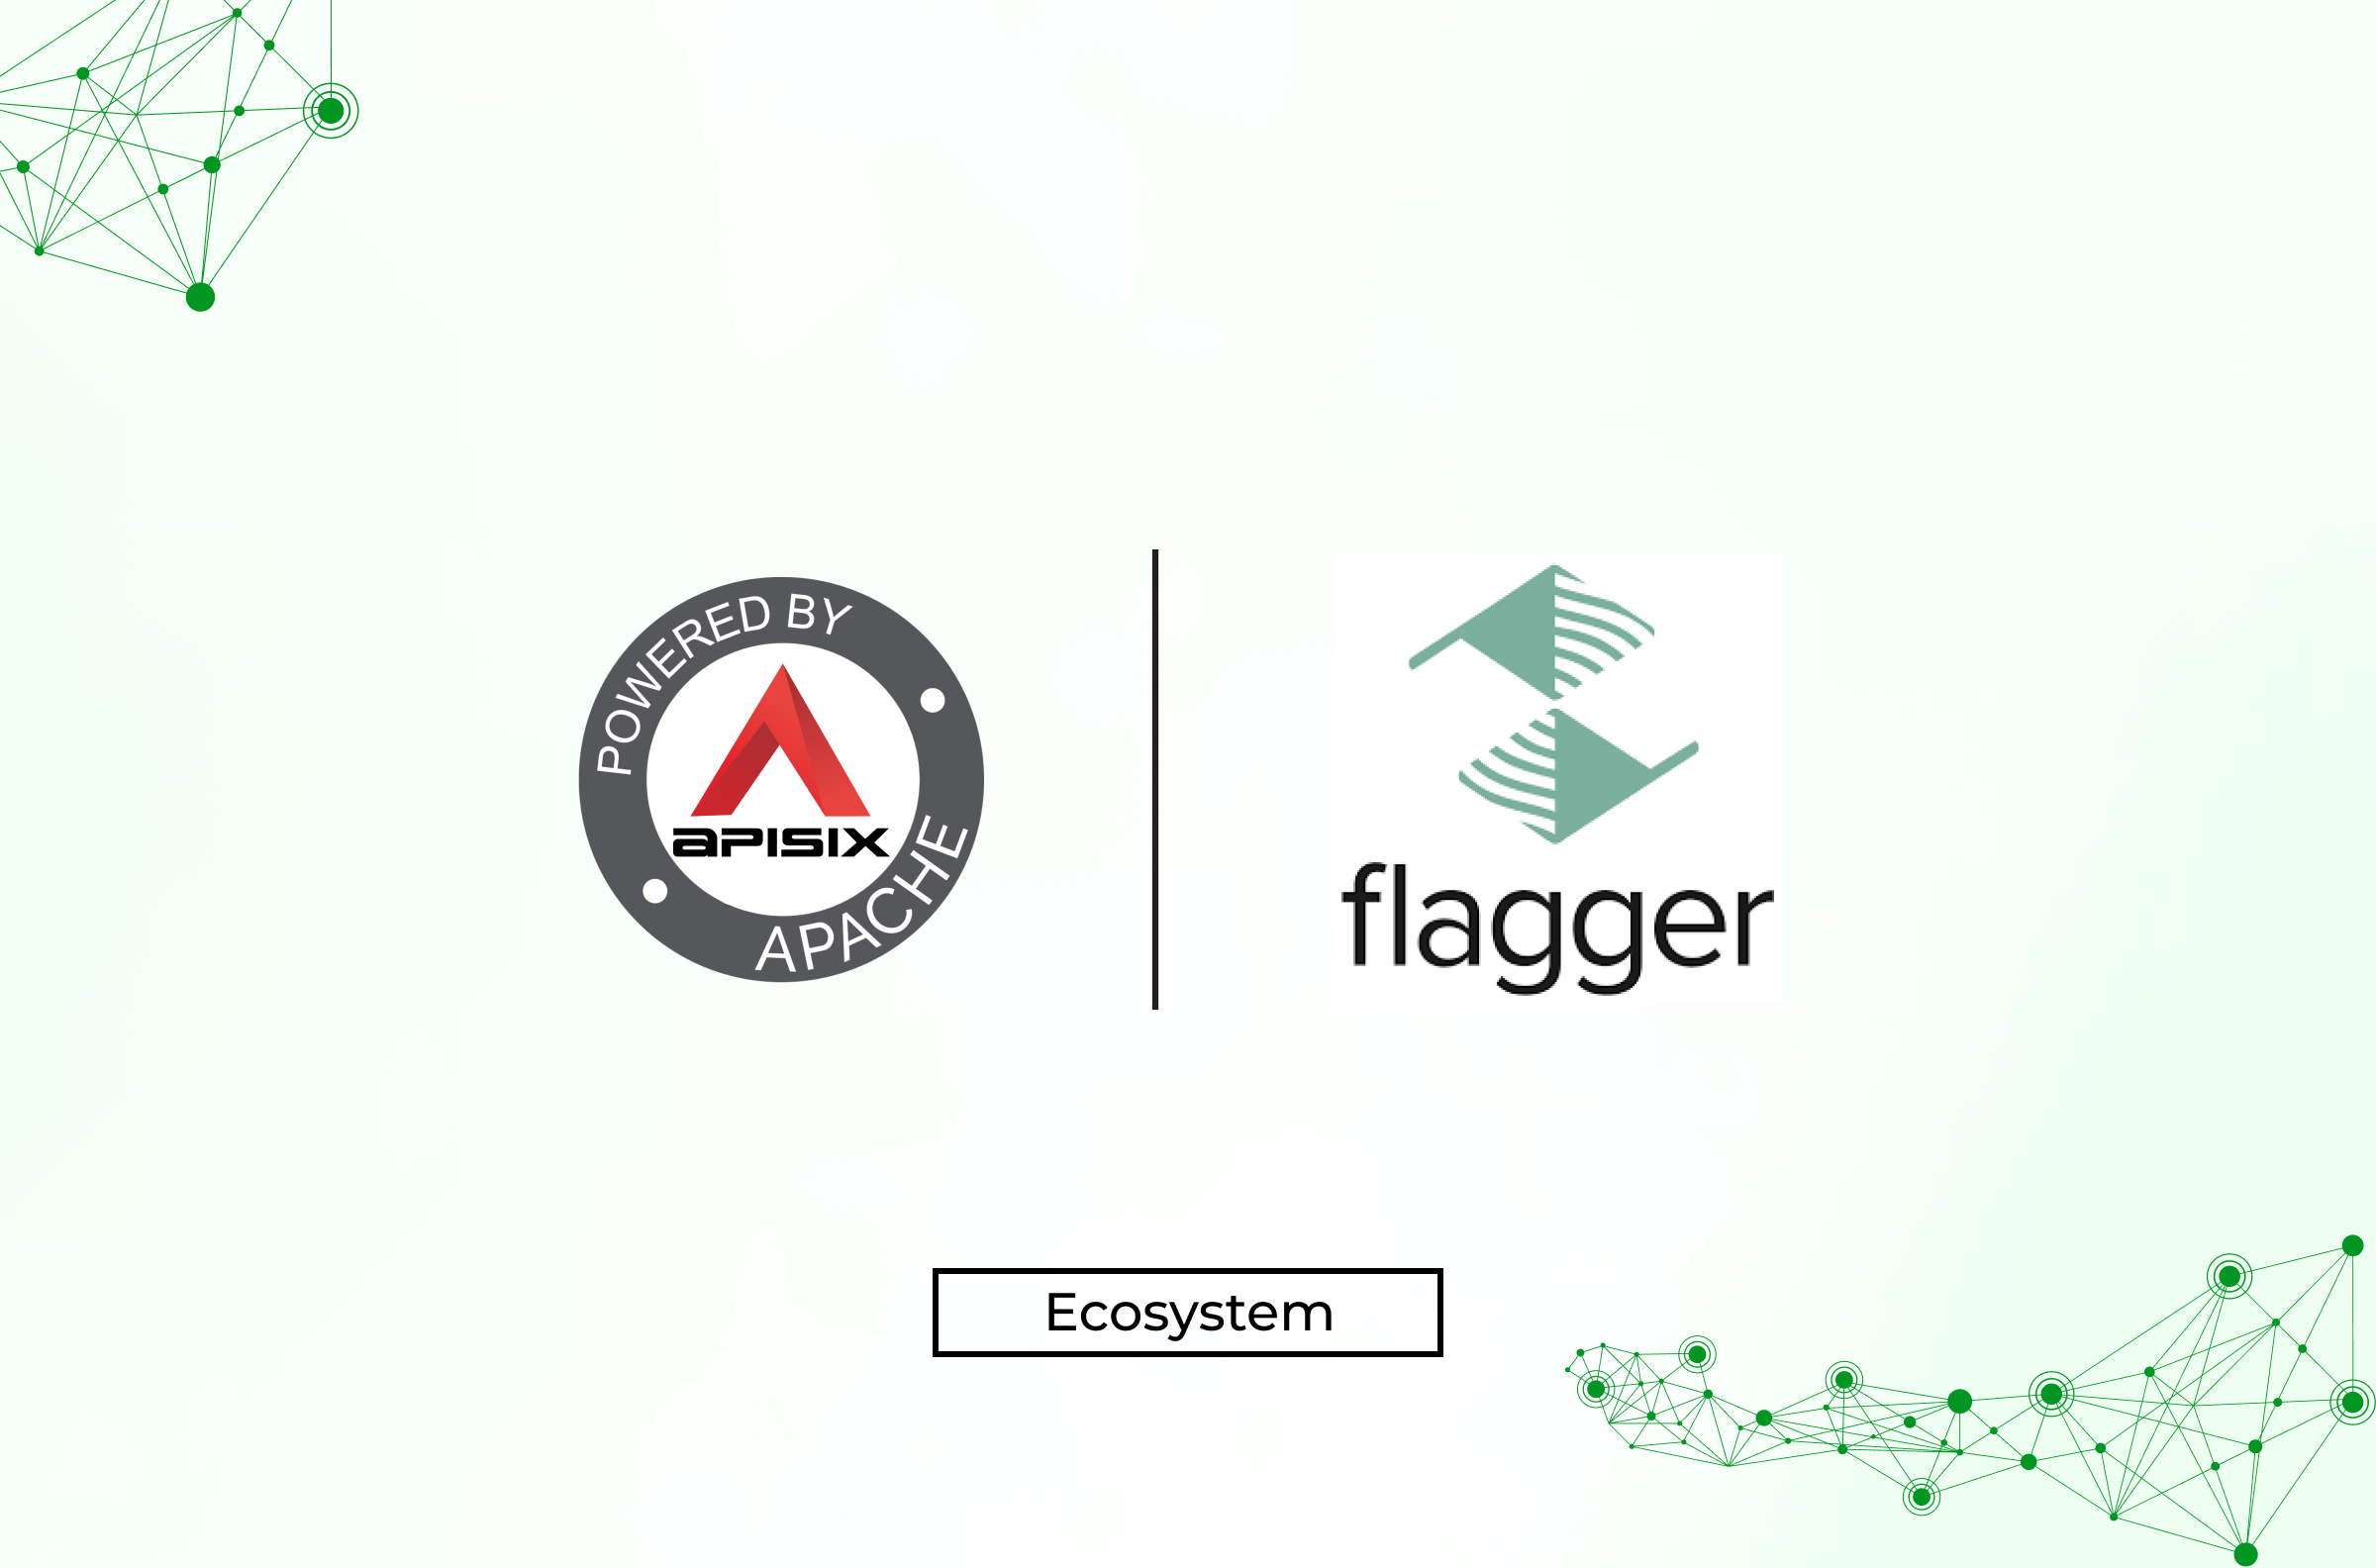 Smooth Canary Release by Combining Apache APISIX Ingress Controller with Flagger